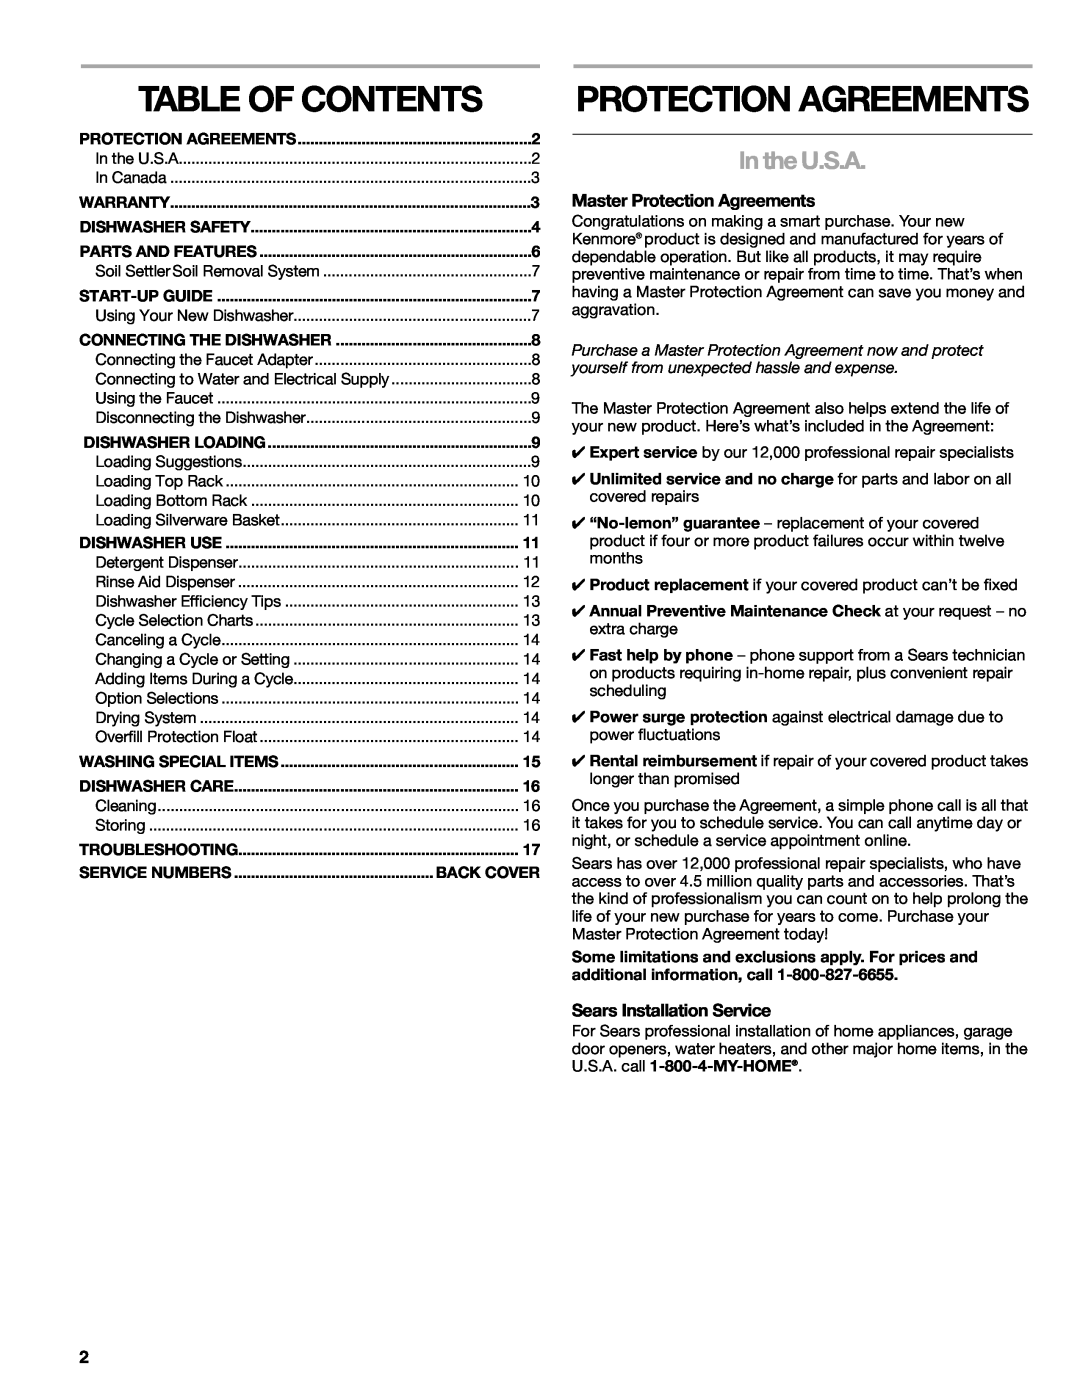 Kenmore 665.1771 Table Of Contents, In the U.S.A, Master Protection Agreements, Sears Installation Service, Back Cover 